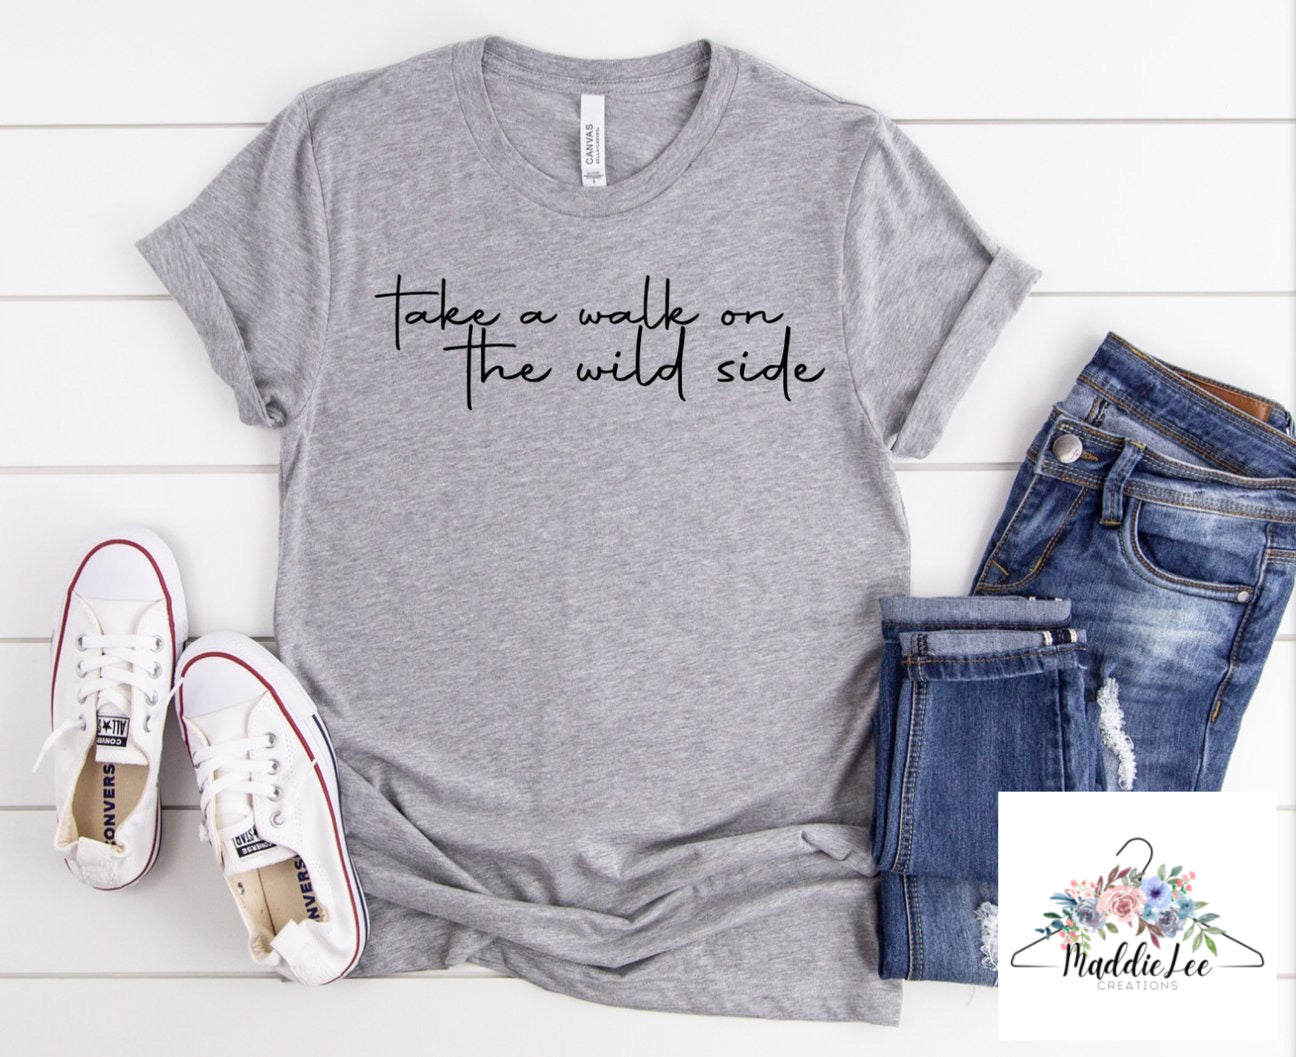 Walk in the Wild Side Adult Tee